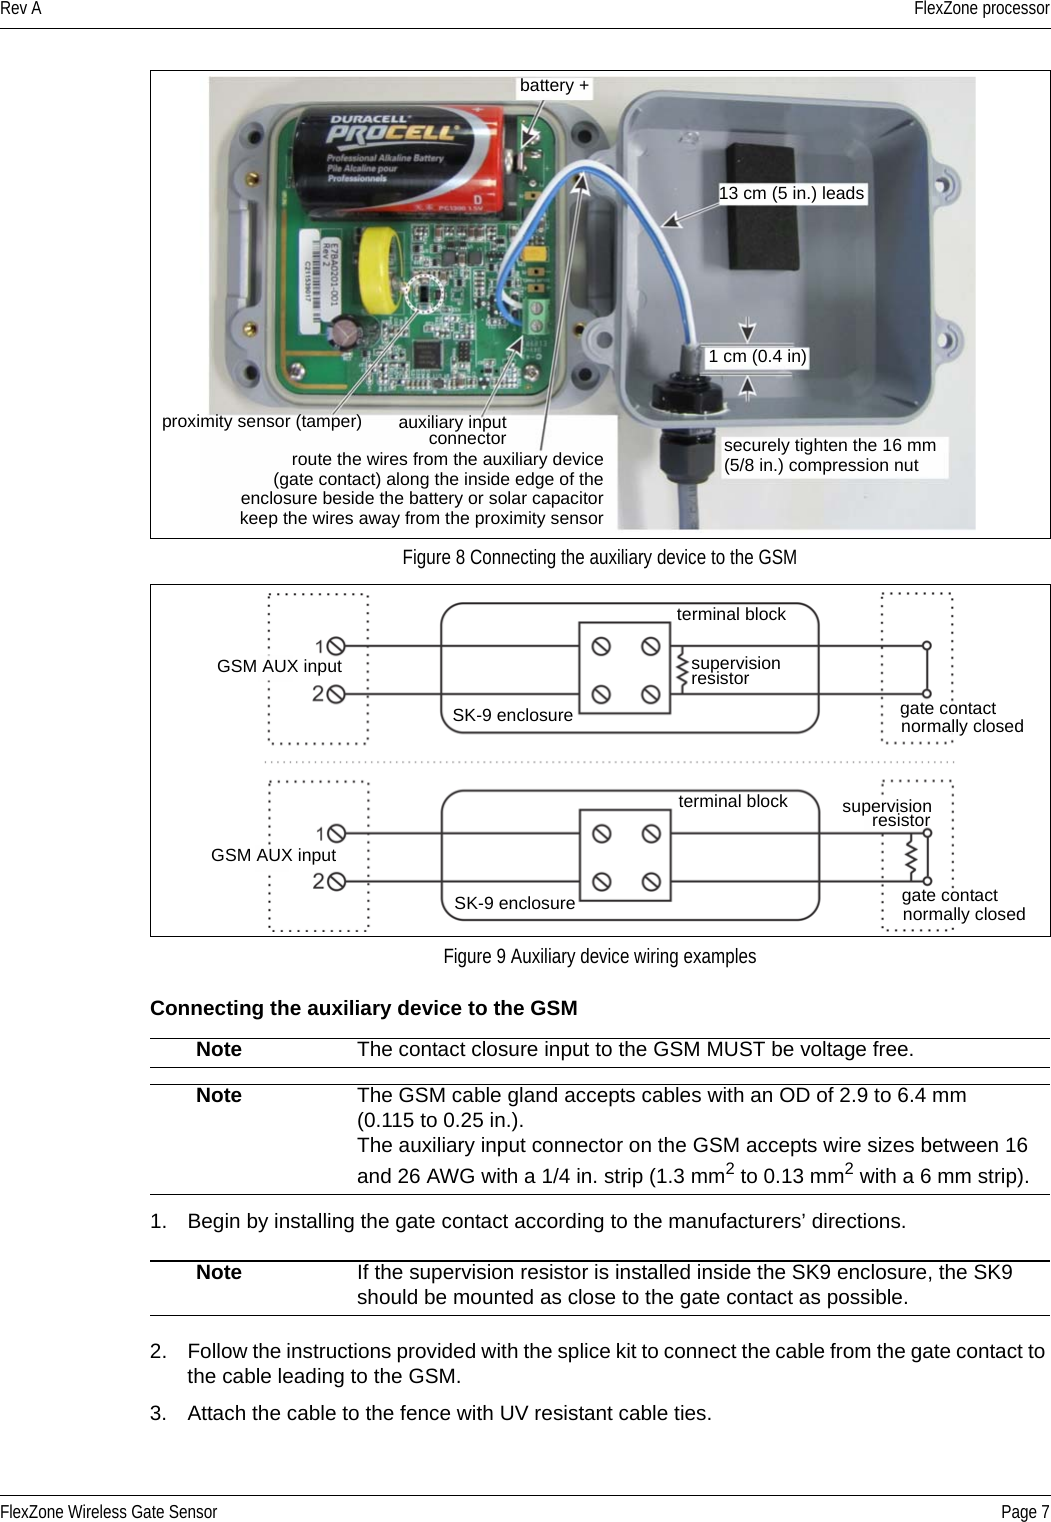 Rev A FlexZone processorFlexZone Wireless Gate Sensor Page 7Connecting the auxiliary device to the GSM 1. Begin by installing the gate contact according to the manufacturers’ directions.2. Follow the instructions provided with the splice kit to connect the cable from the gate contact to the cable leading to the GSM.3. Attach the cable to the fence with UV resistant cable ties.  Figure 8 Connecting the auxiliary device to the GSMFigure 9 Auxiliary device wiring examplesNote The contact closure input to the GSM MUST be voltage free.Note The GSM cable gland accepts cables with an OD of 2.9 to 6.4 mm (0.115 to 0.25 in.). The auxiliary input connector on the GSM accepts wire sizes between 16and 26 AWG with a 1/4 in. strip (1.3 mm2 to 0.13 mm2 with a 6 mm strip).Note If the supervision resistor is installed inside the SK9 enclosure, the SK9 should be mounted as close to the gate contact as possible.battery +13 cm (5 in.) leadssecurely tighten the 16 mm proximity sensor (tamper) auxiliary input1 cm (0.4 in)(5/8 in.) compression nutconnectorroute the wires from the auxiliary device(gate contact) along the inside edge of theenclosure beside the battery or solar capacitorkeep the wires away from the proximity sensorgate contactnormally closedGSM AUX input supervisionSK-9 enclosureterminal blockresistorgate contactnormally closedGSM AUX inputsupervisionSK-9 enclosureterminal block resistor